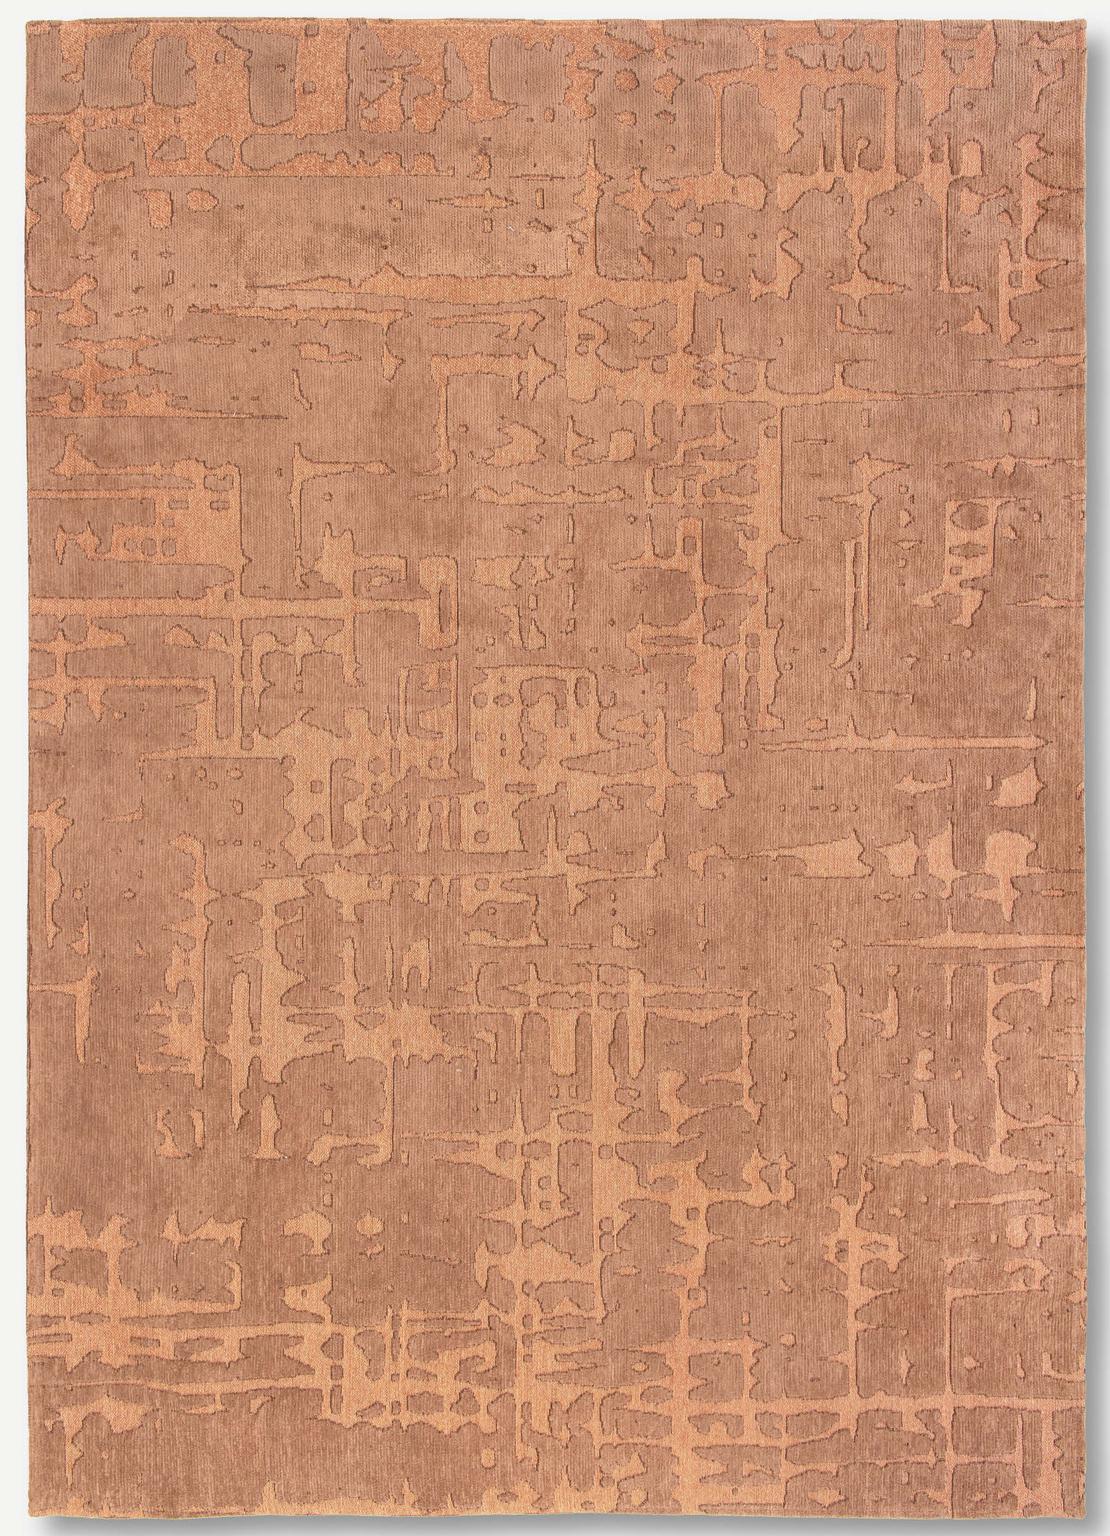 Abstract Brown Belgian Rug ☞ Size: 2' 7" x 8' 2" (80 x 250 cm)